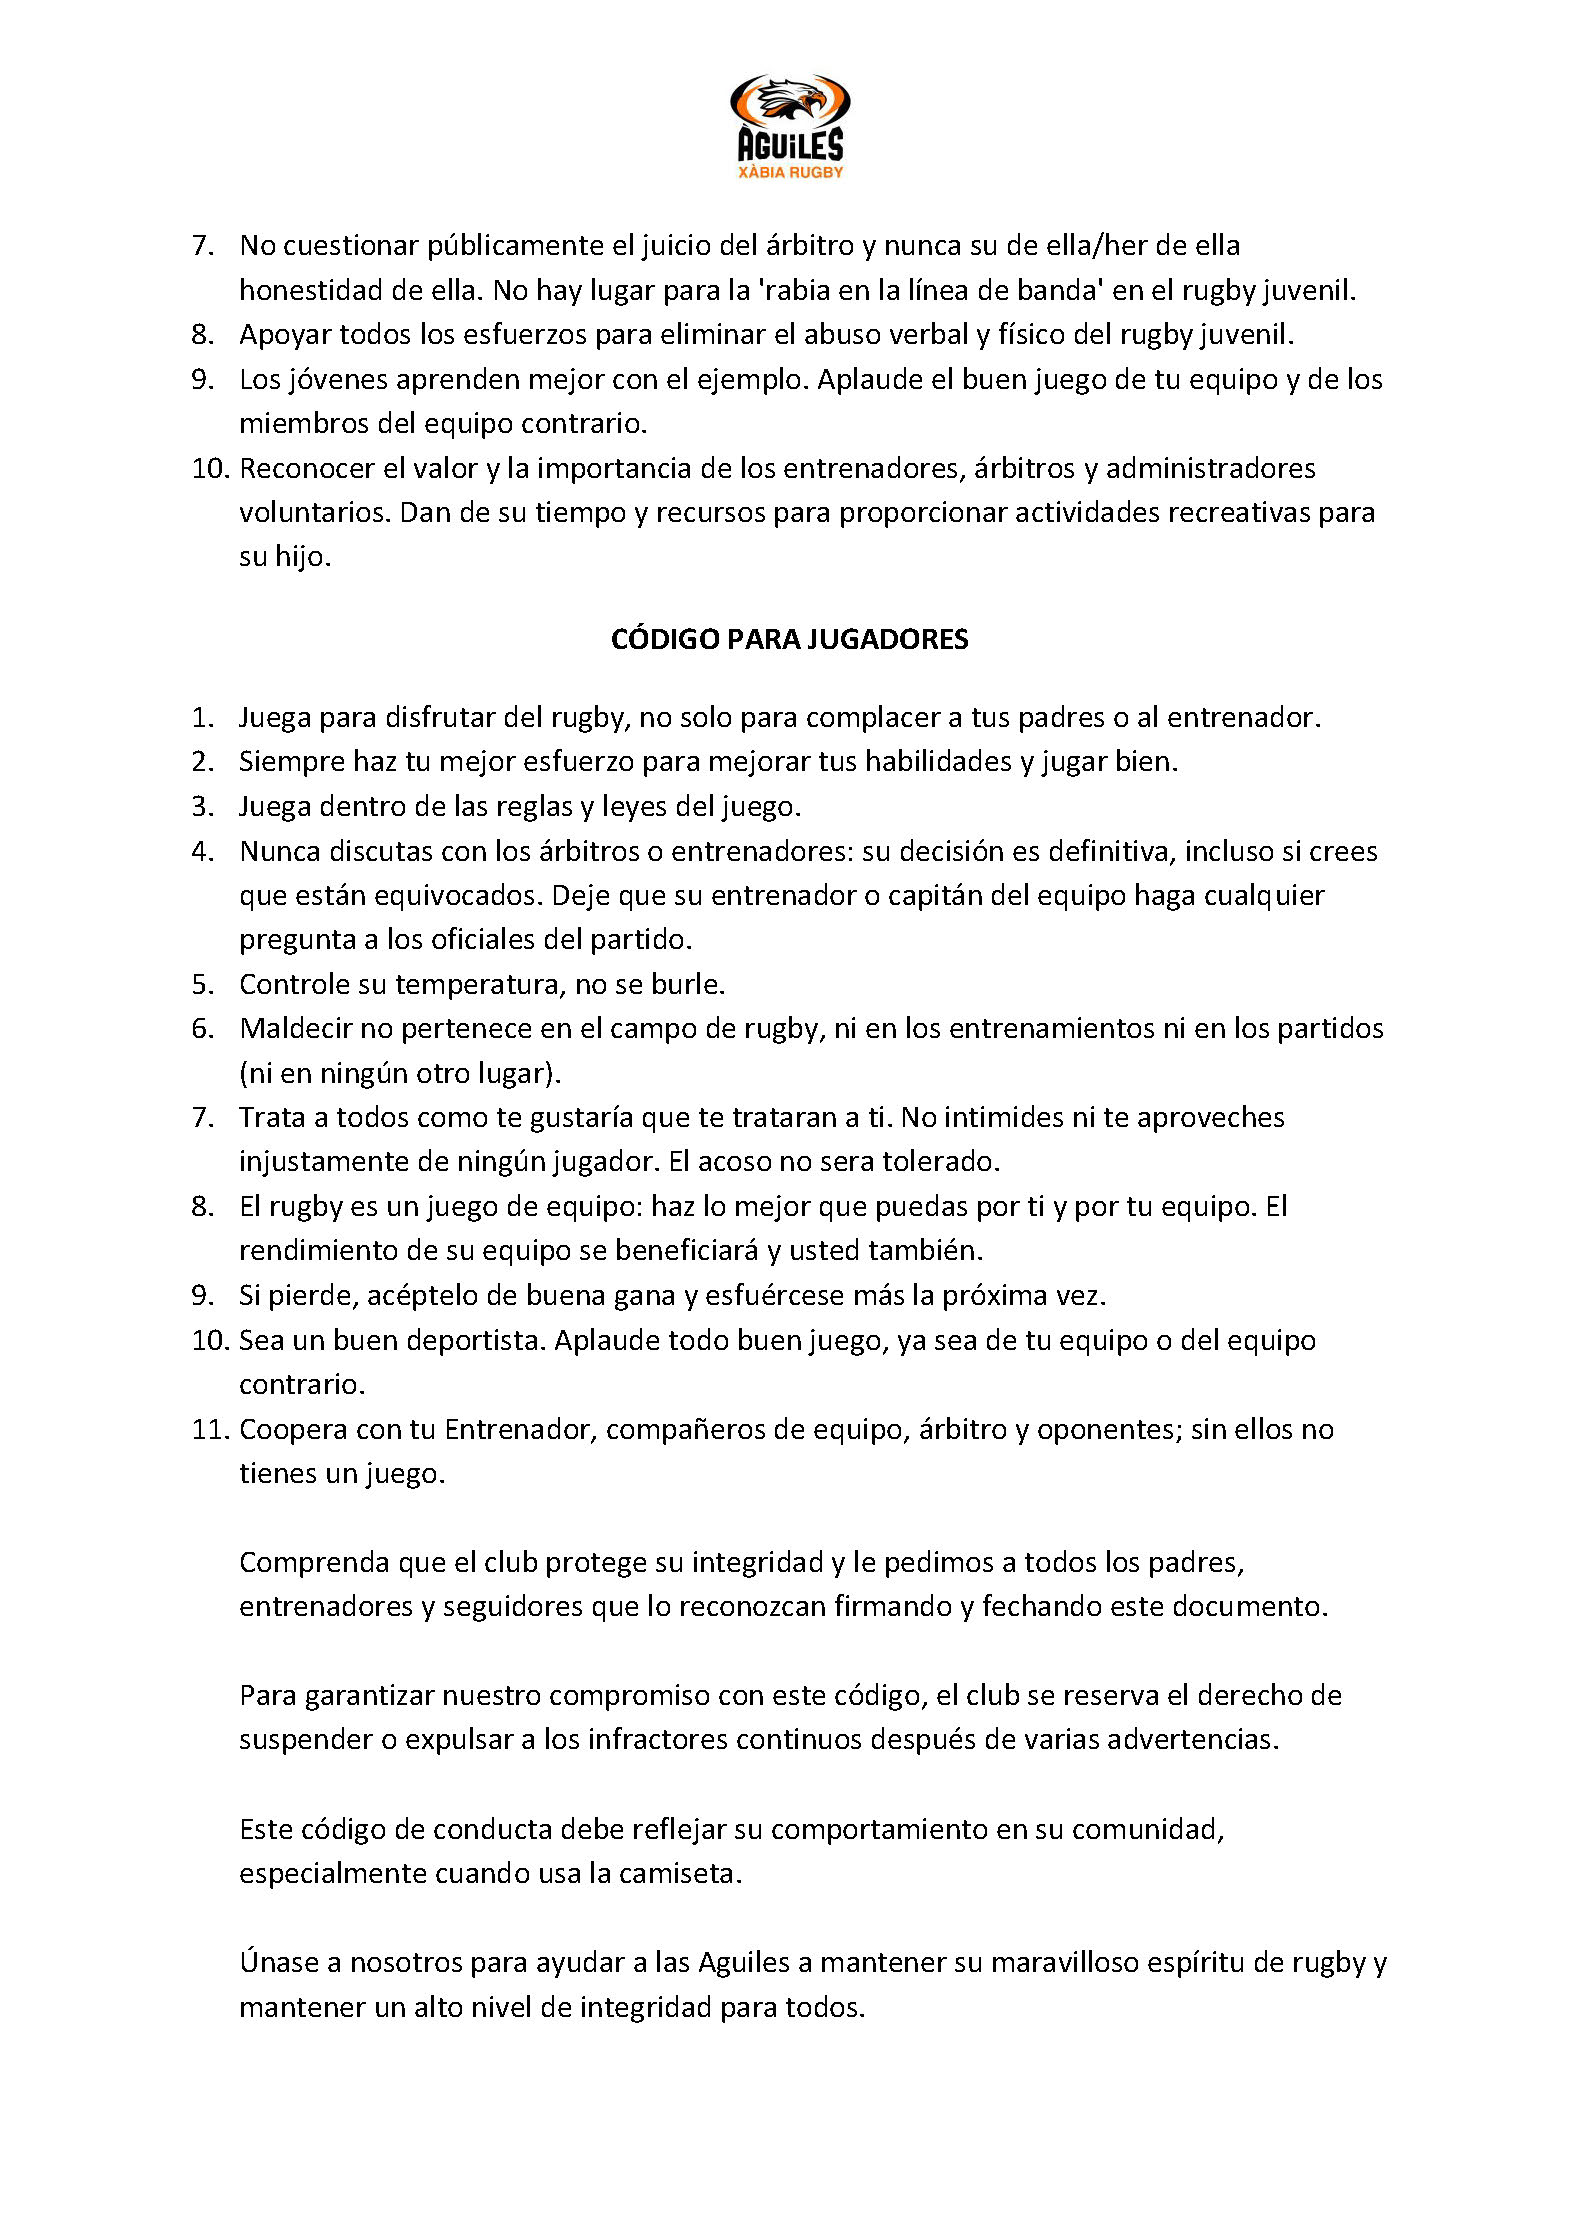 Xabia Aguiles Code of Conduct 2023_Page_1.jpg